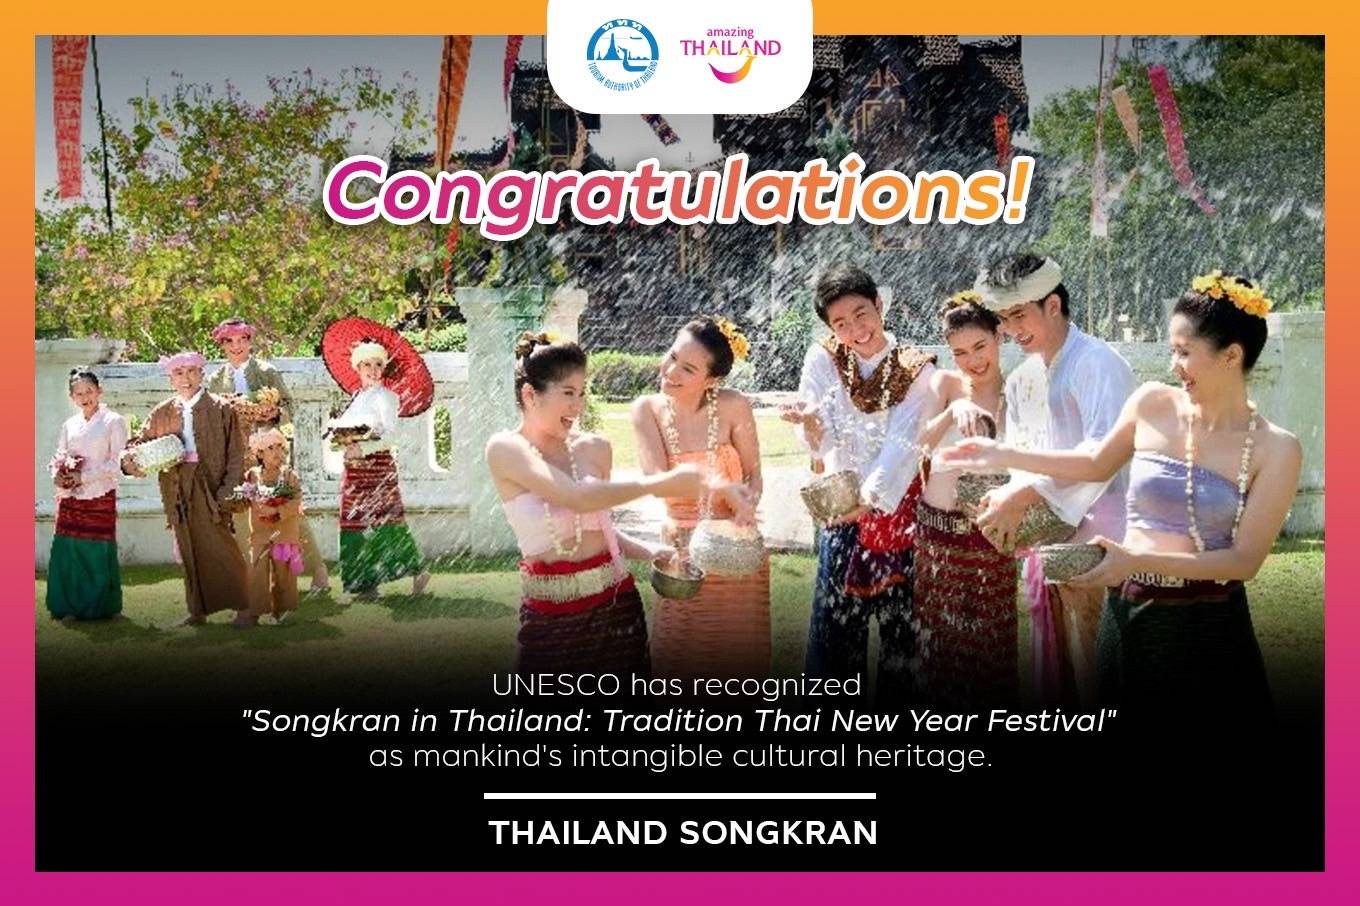 UNESCO has officially designated 'Songkran in Thailand, traditional Thai New Year festival', as an Intangible Cultural Heritage